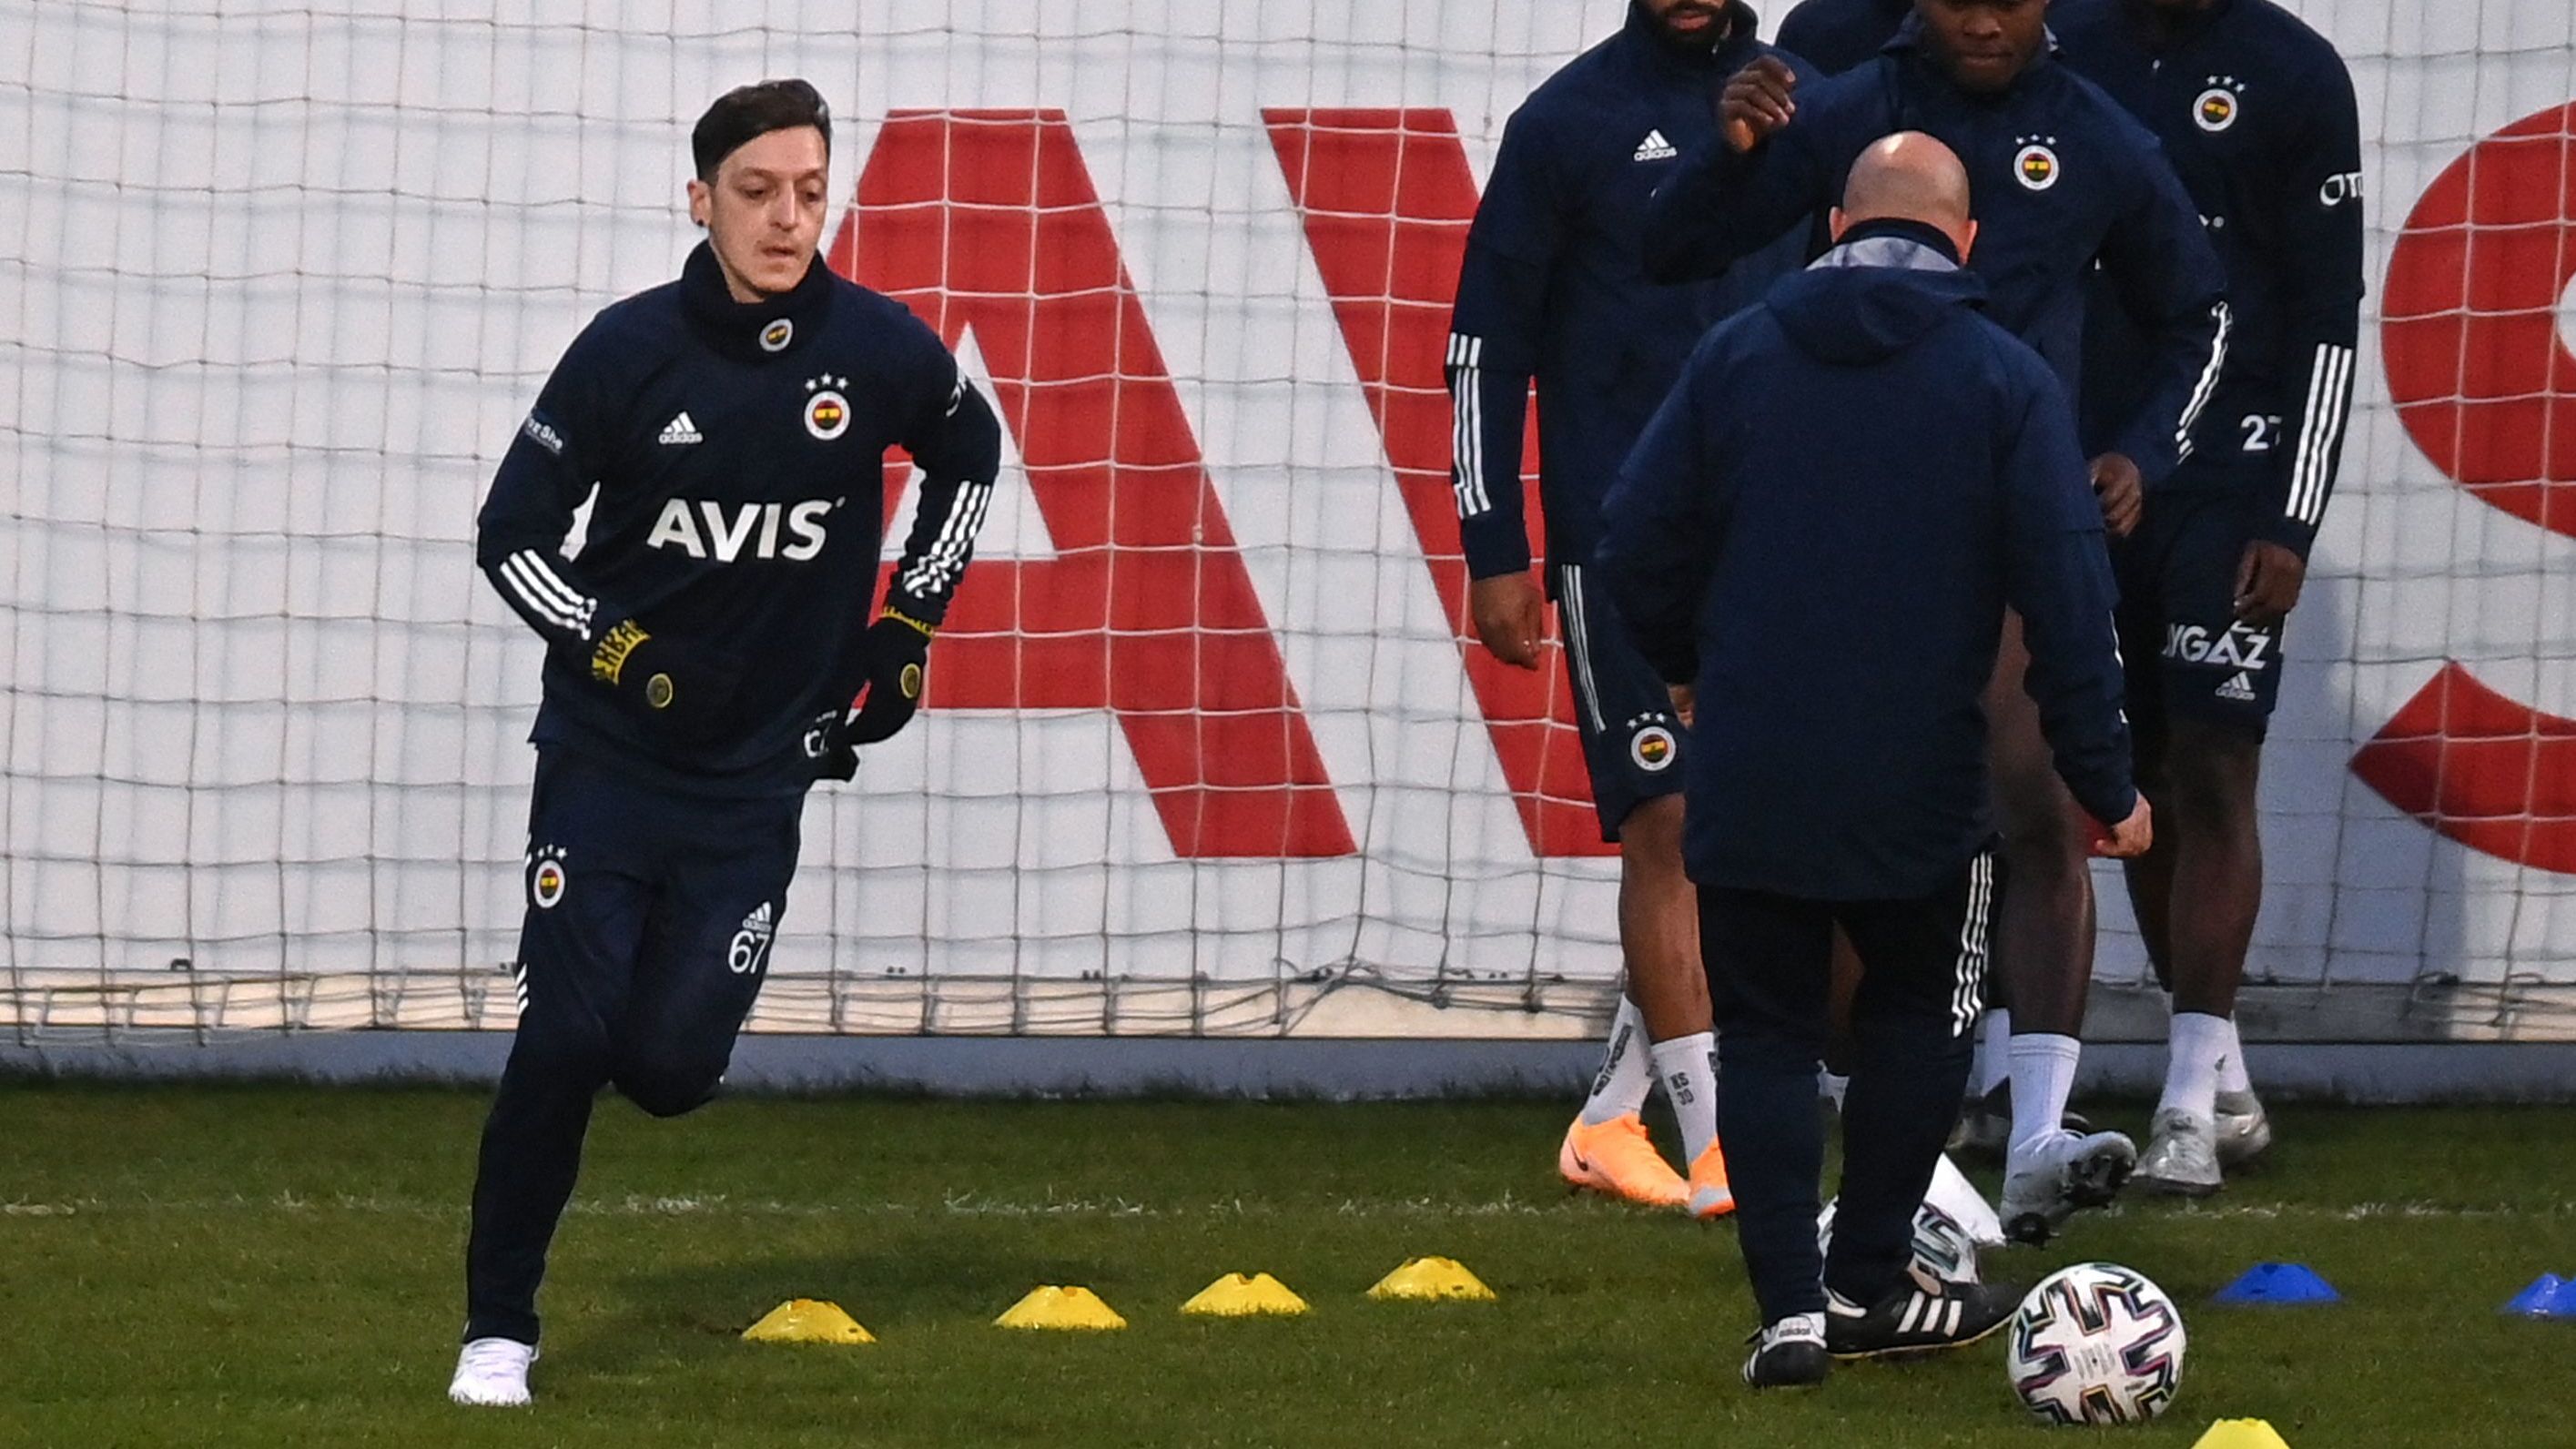 Mesut Ozil trains with Turkish side Fenerbahce following his transfer from Arsenal.